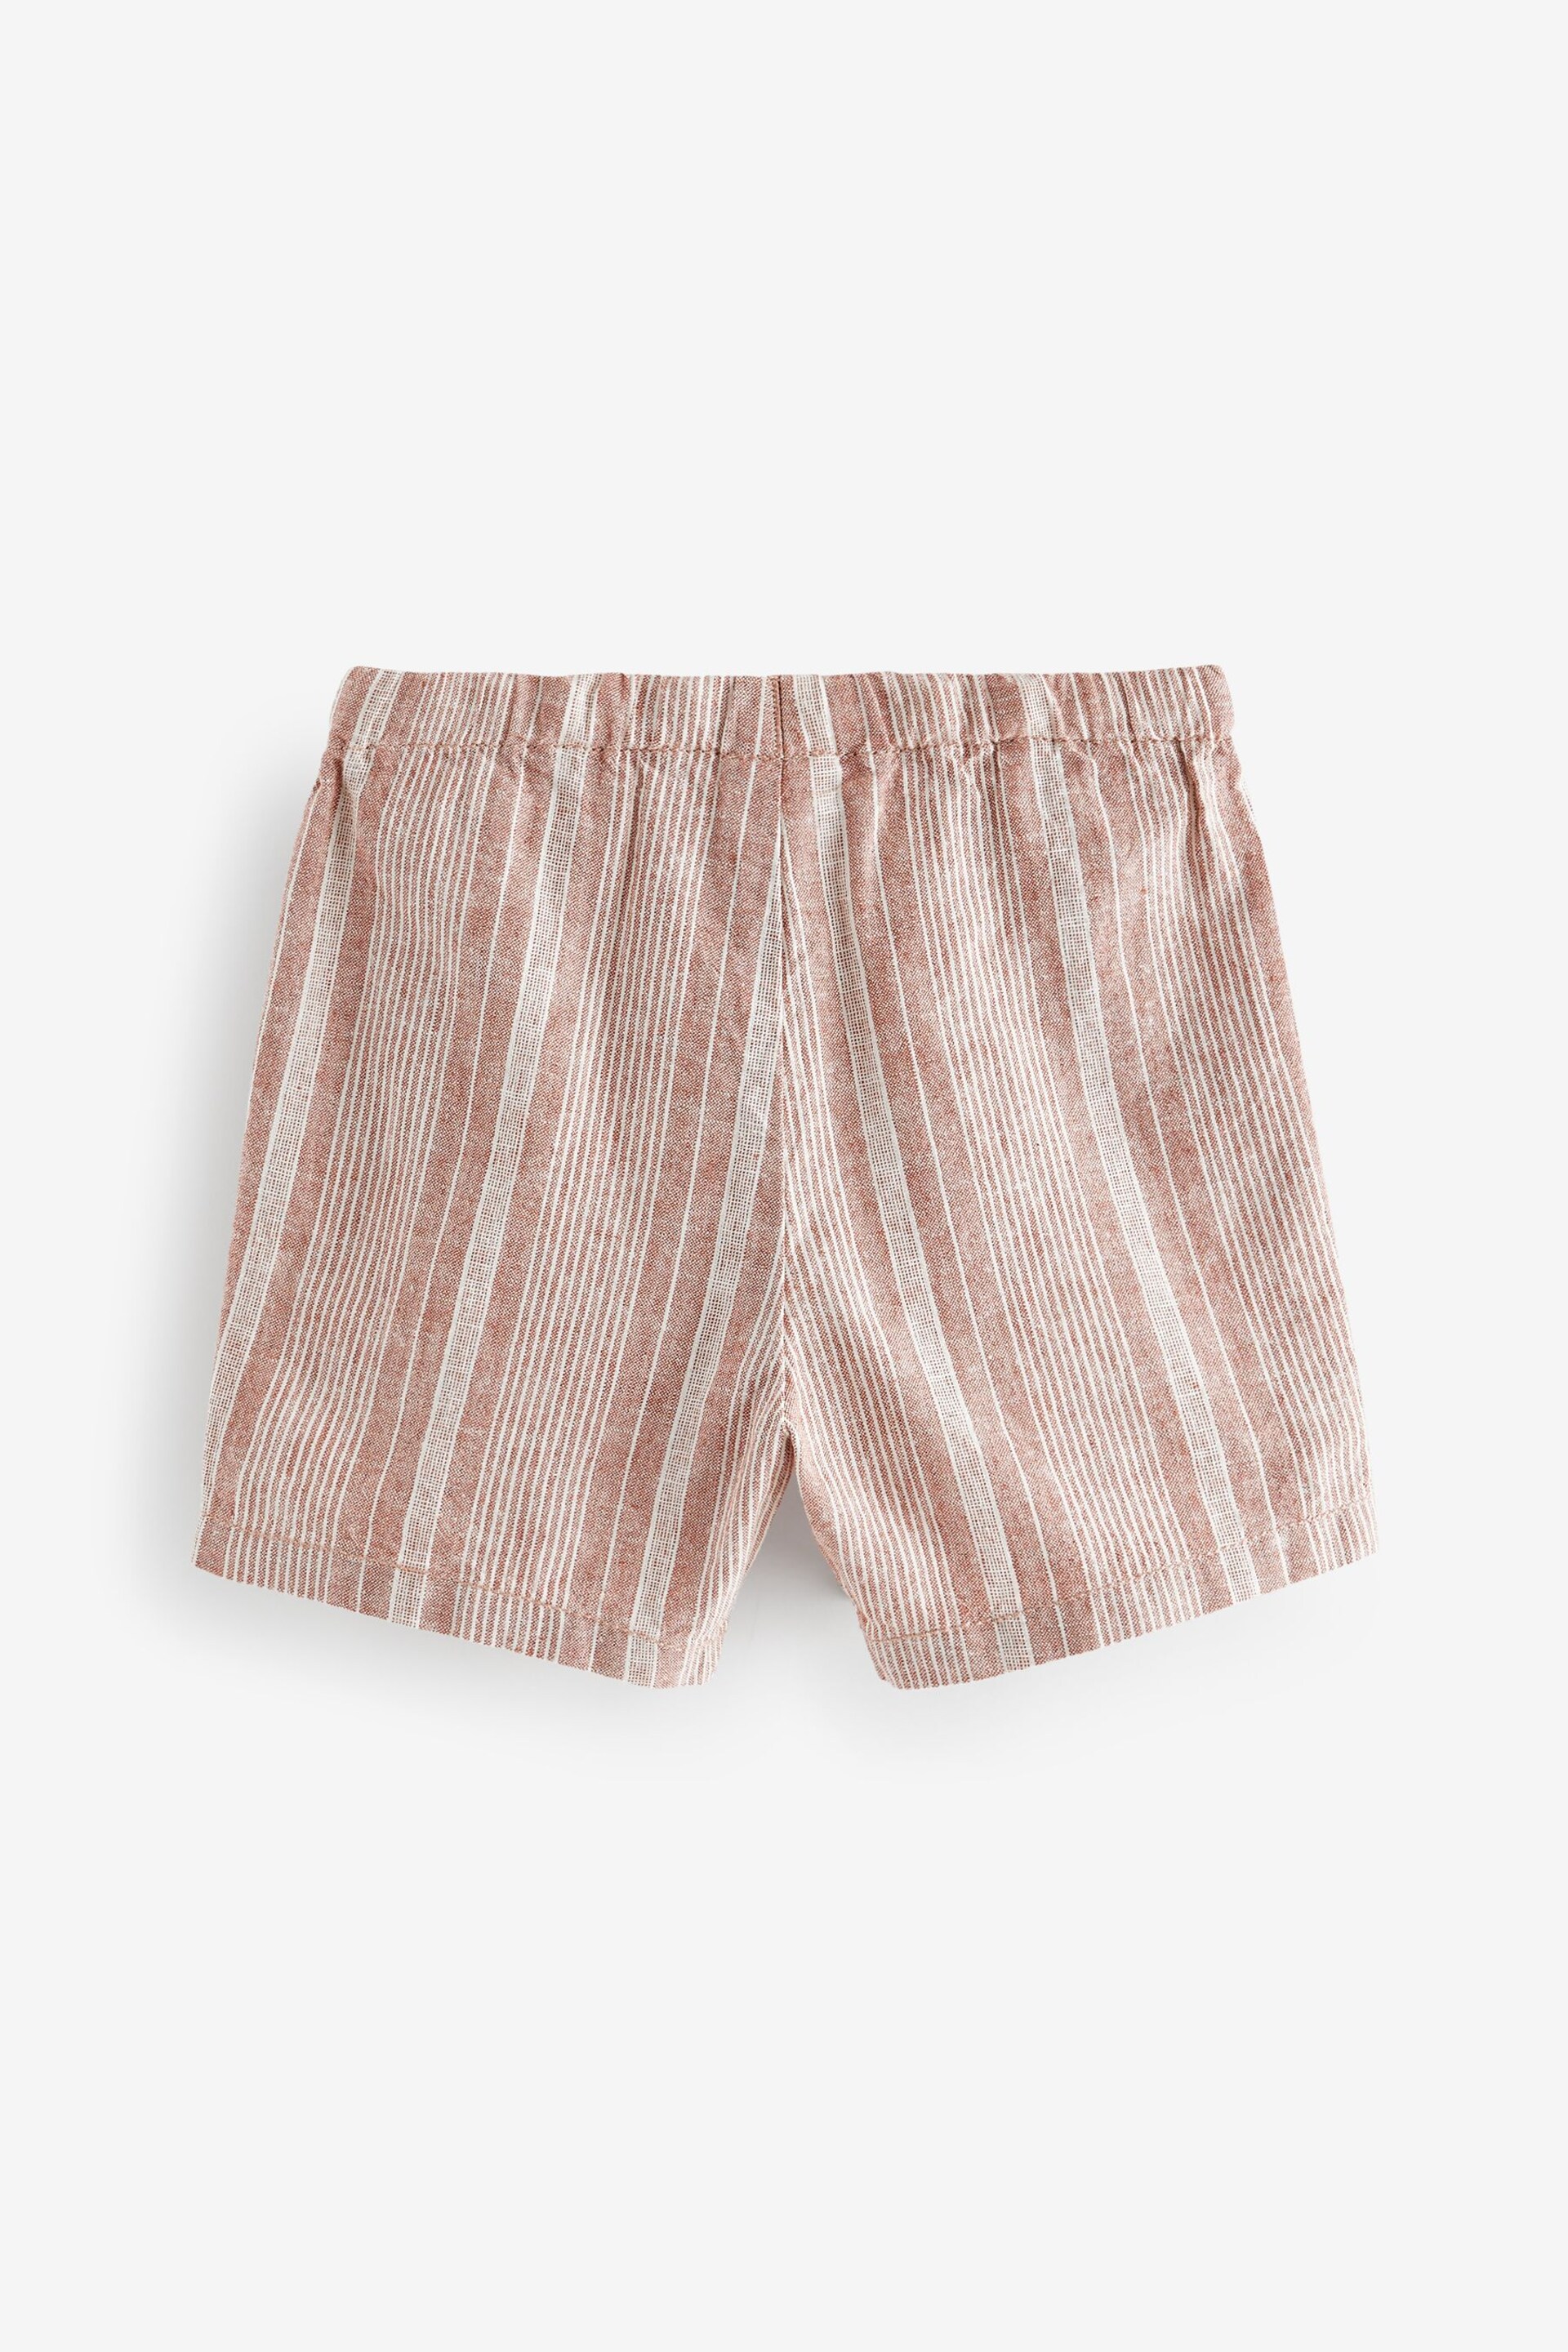 Rust Stripe Linen Blend Pull-On Shorts (3mths-7yrs) - Image 6 of 8